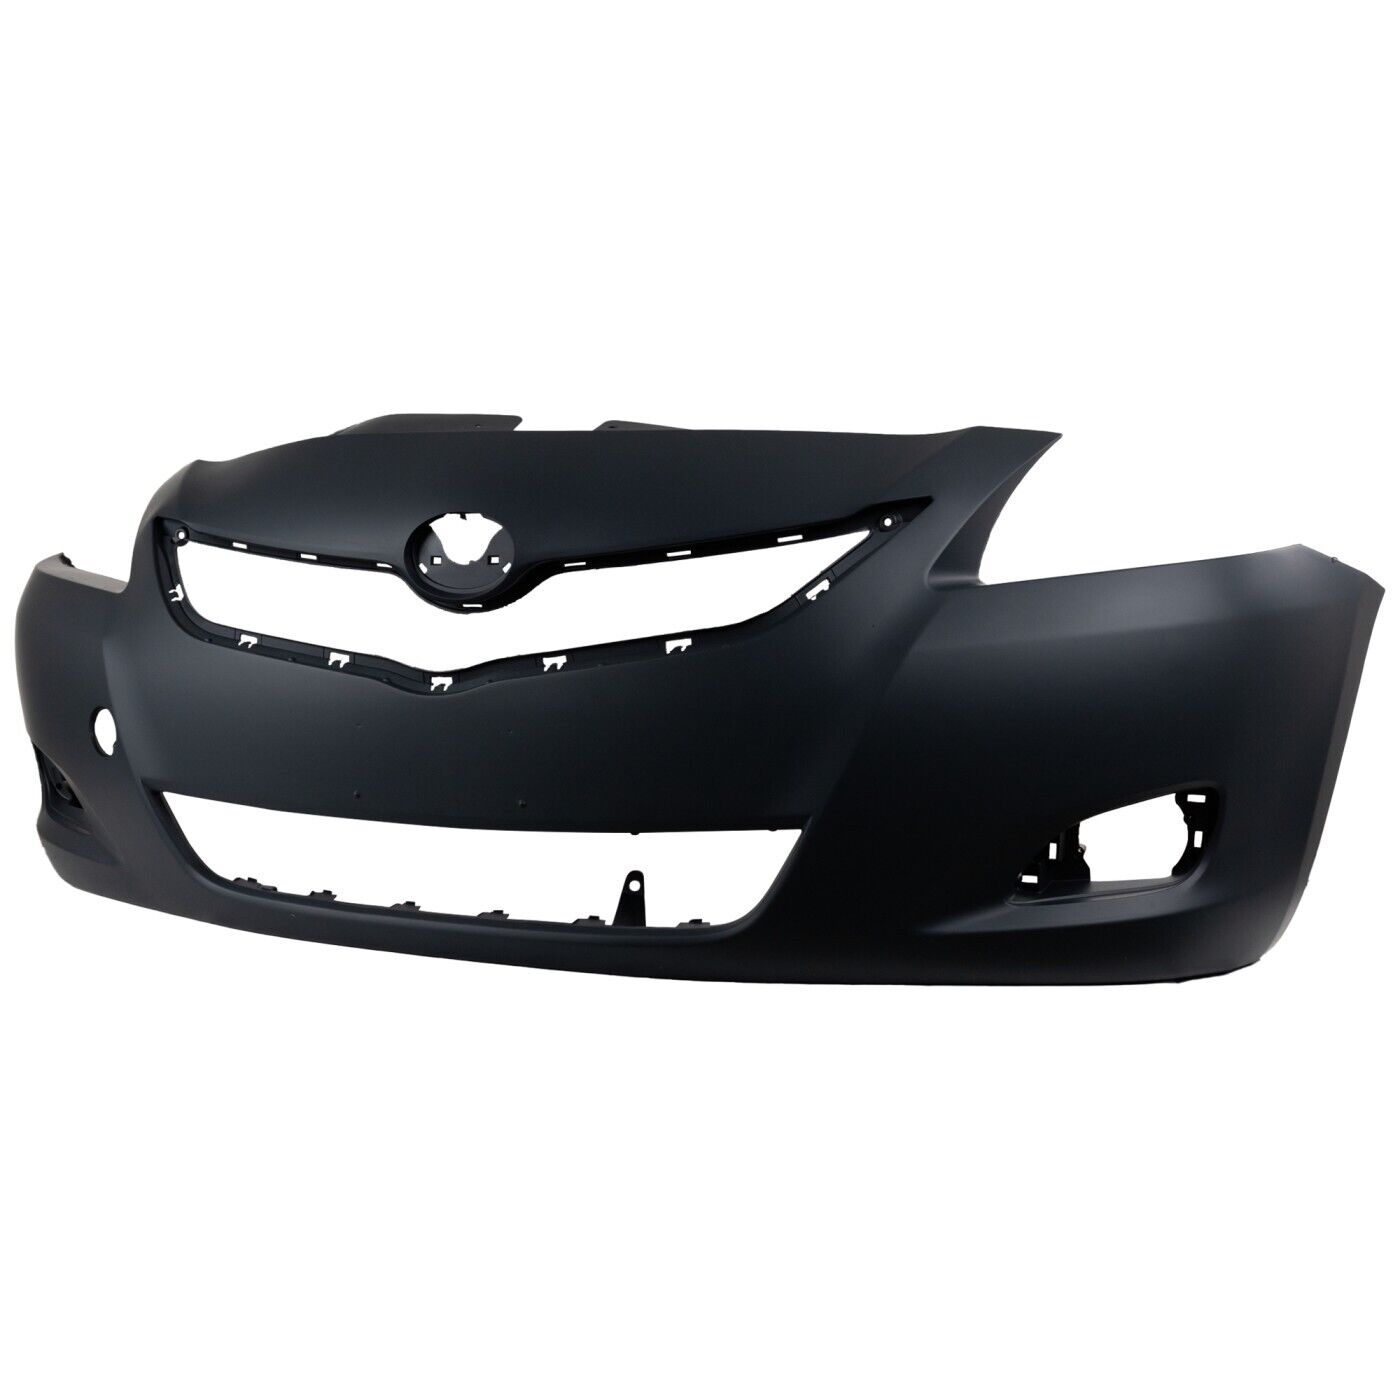 Front Bumper Cover For 2007-2012 Toyota Yaris Sedan with Fog Lamp Holes Primed